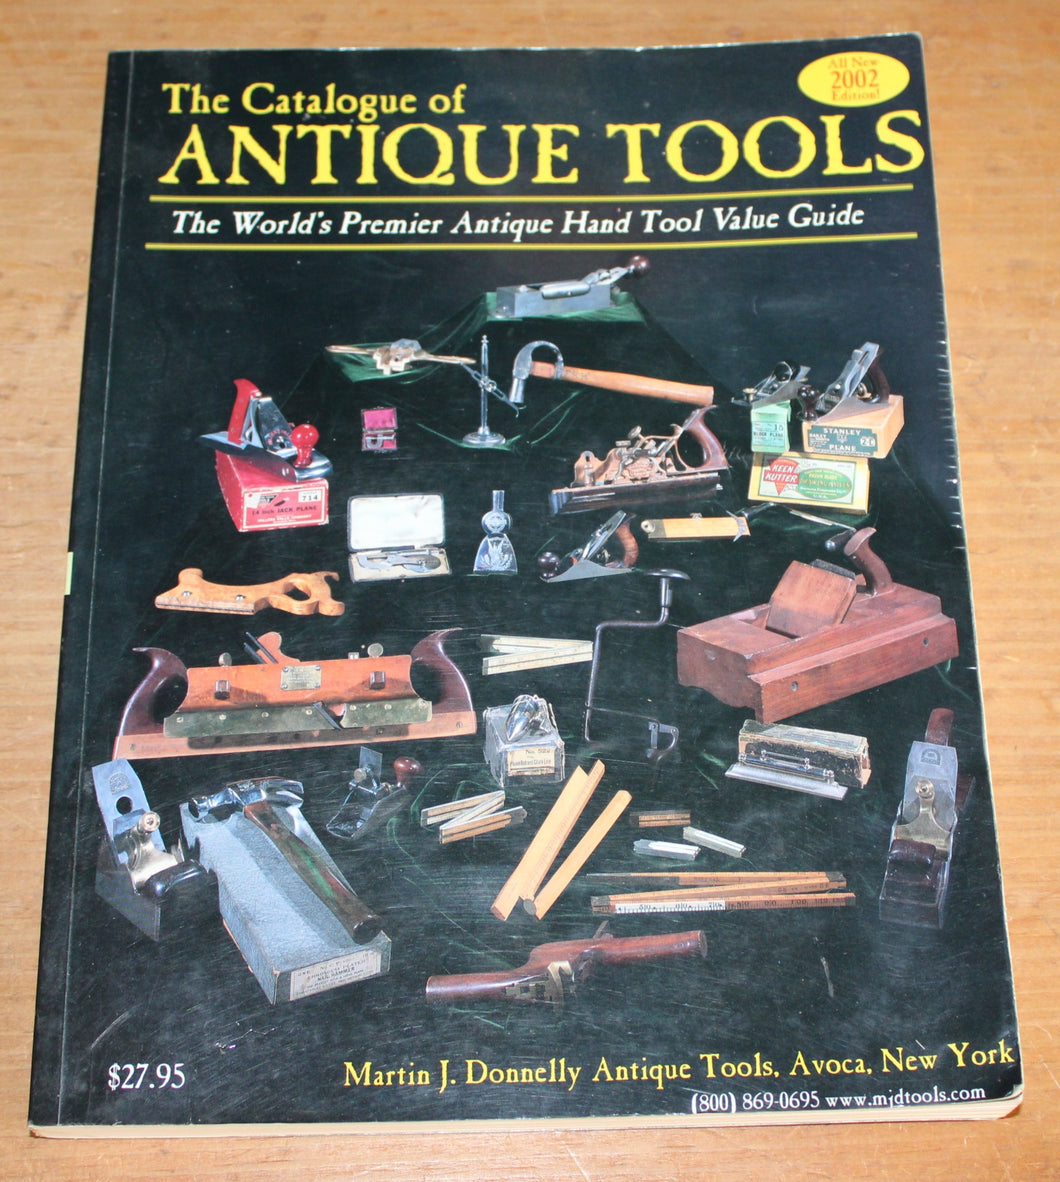 The Catalogue of Antique Tools, Martin J. Donnelly Antique Tools, 2002 Edition